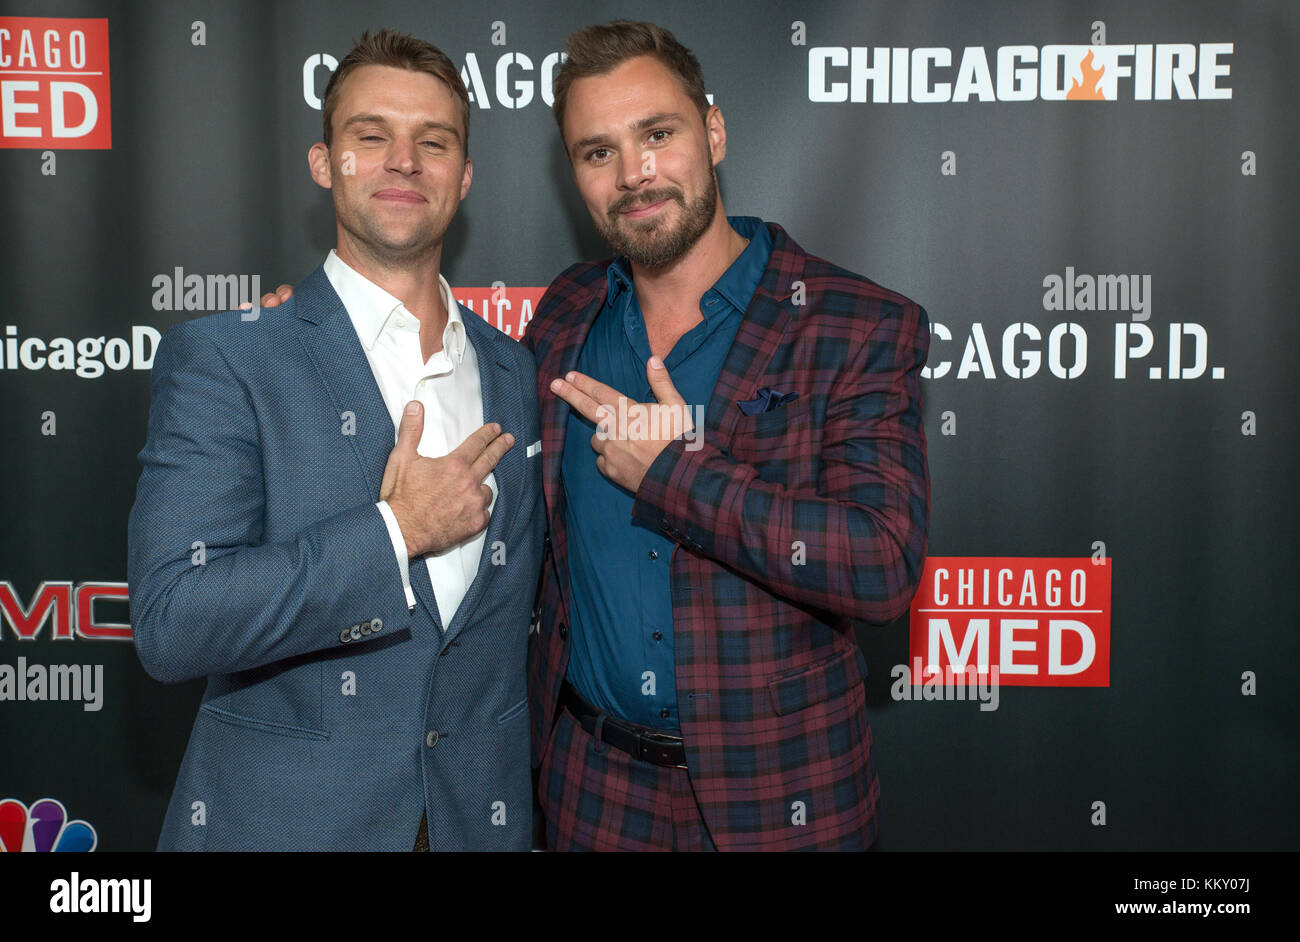 3rd annual NBC One Chicago Party featuring cast members from Chicago Fire, Chicago Med and Chicago P.D - Arrivals  Featuring: Jesse Spencer, Patrick John Flueger Where: Chicago, Illinois, United States When: 31 Oct 2017 Credit: WENN Stock Photo